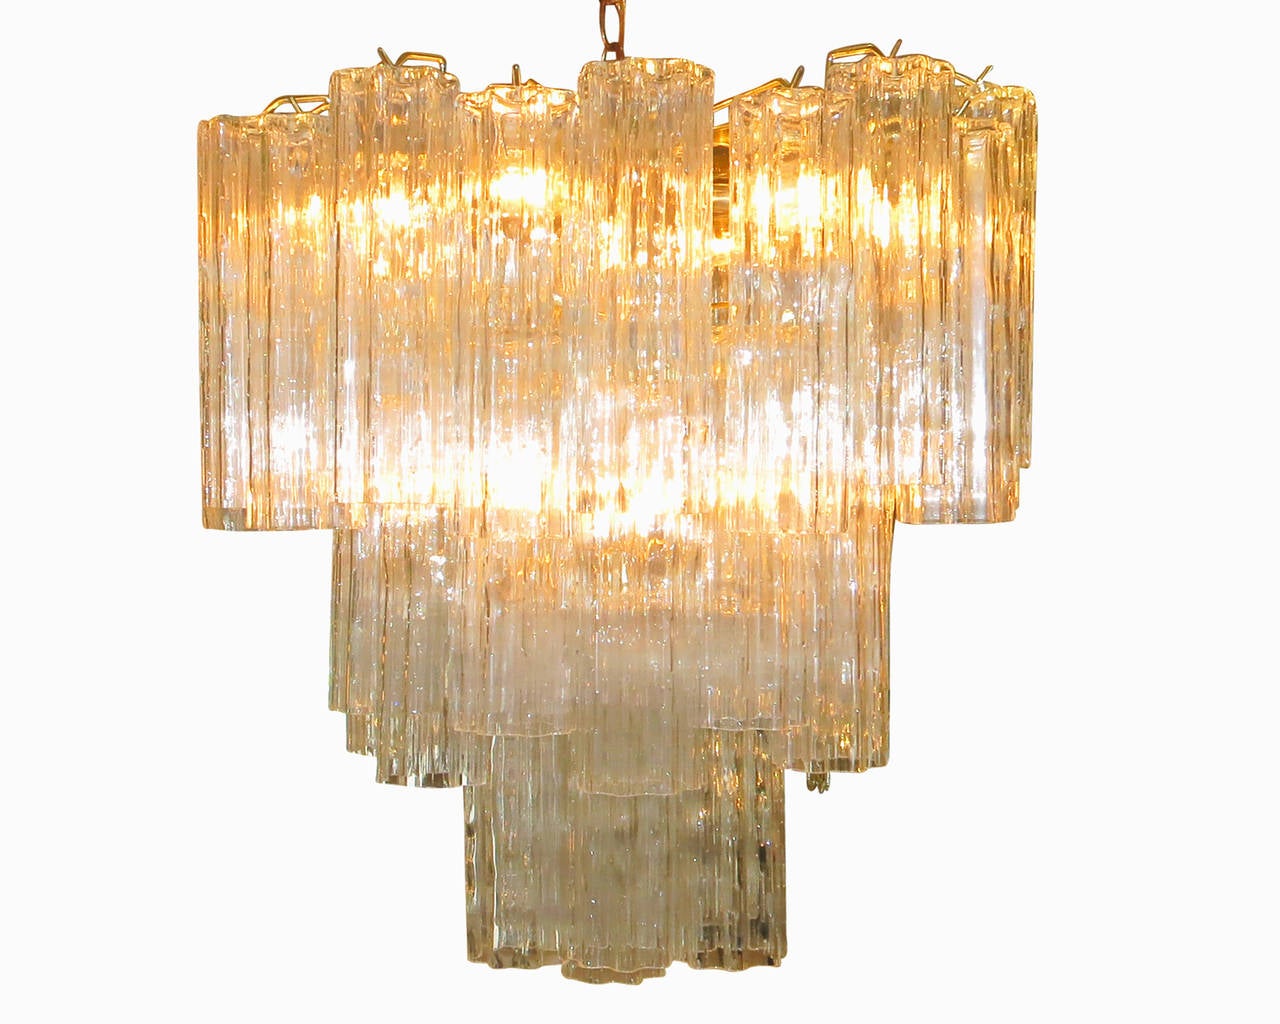 Made in Italy, this gorgeous Venini round chandelier features a brass frame and three tiers of textured glass pendants, known as tronchi. The light glistens through the glass pendants, which are uniform in shape and size. 

Note that the